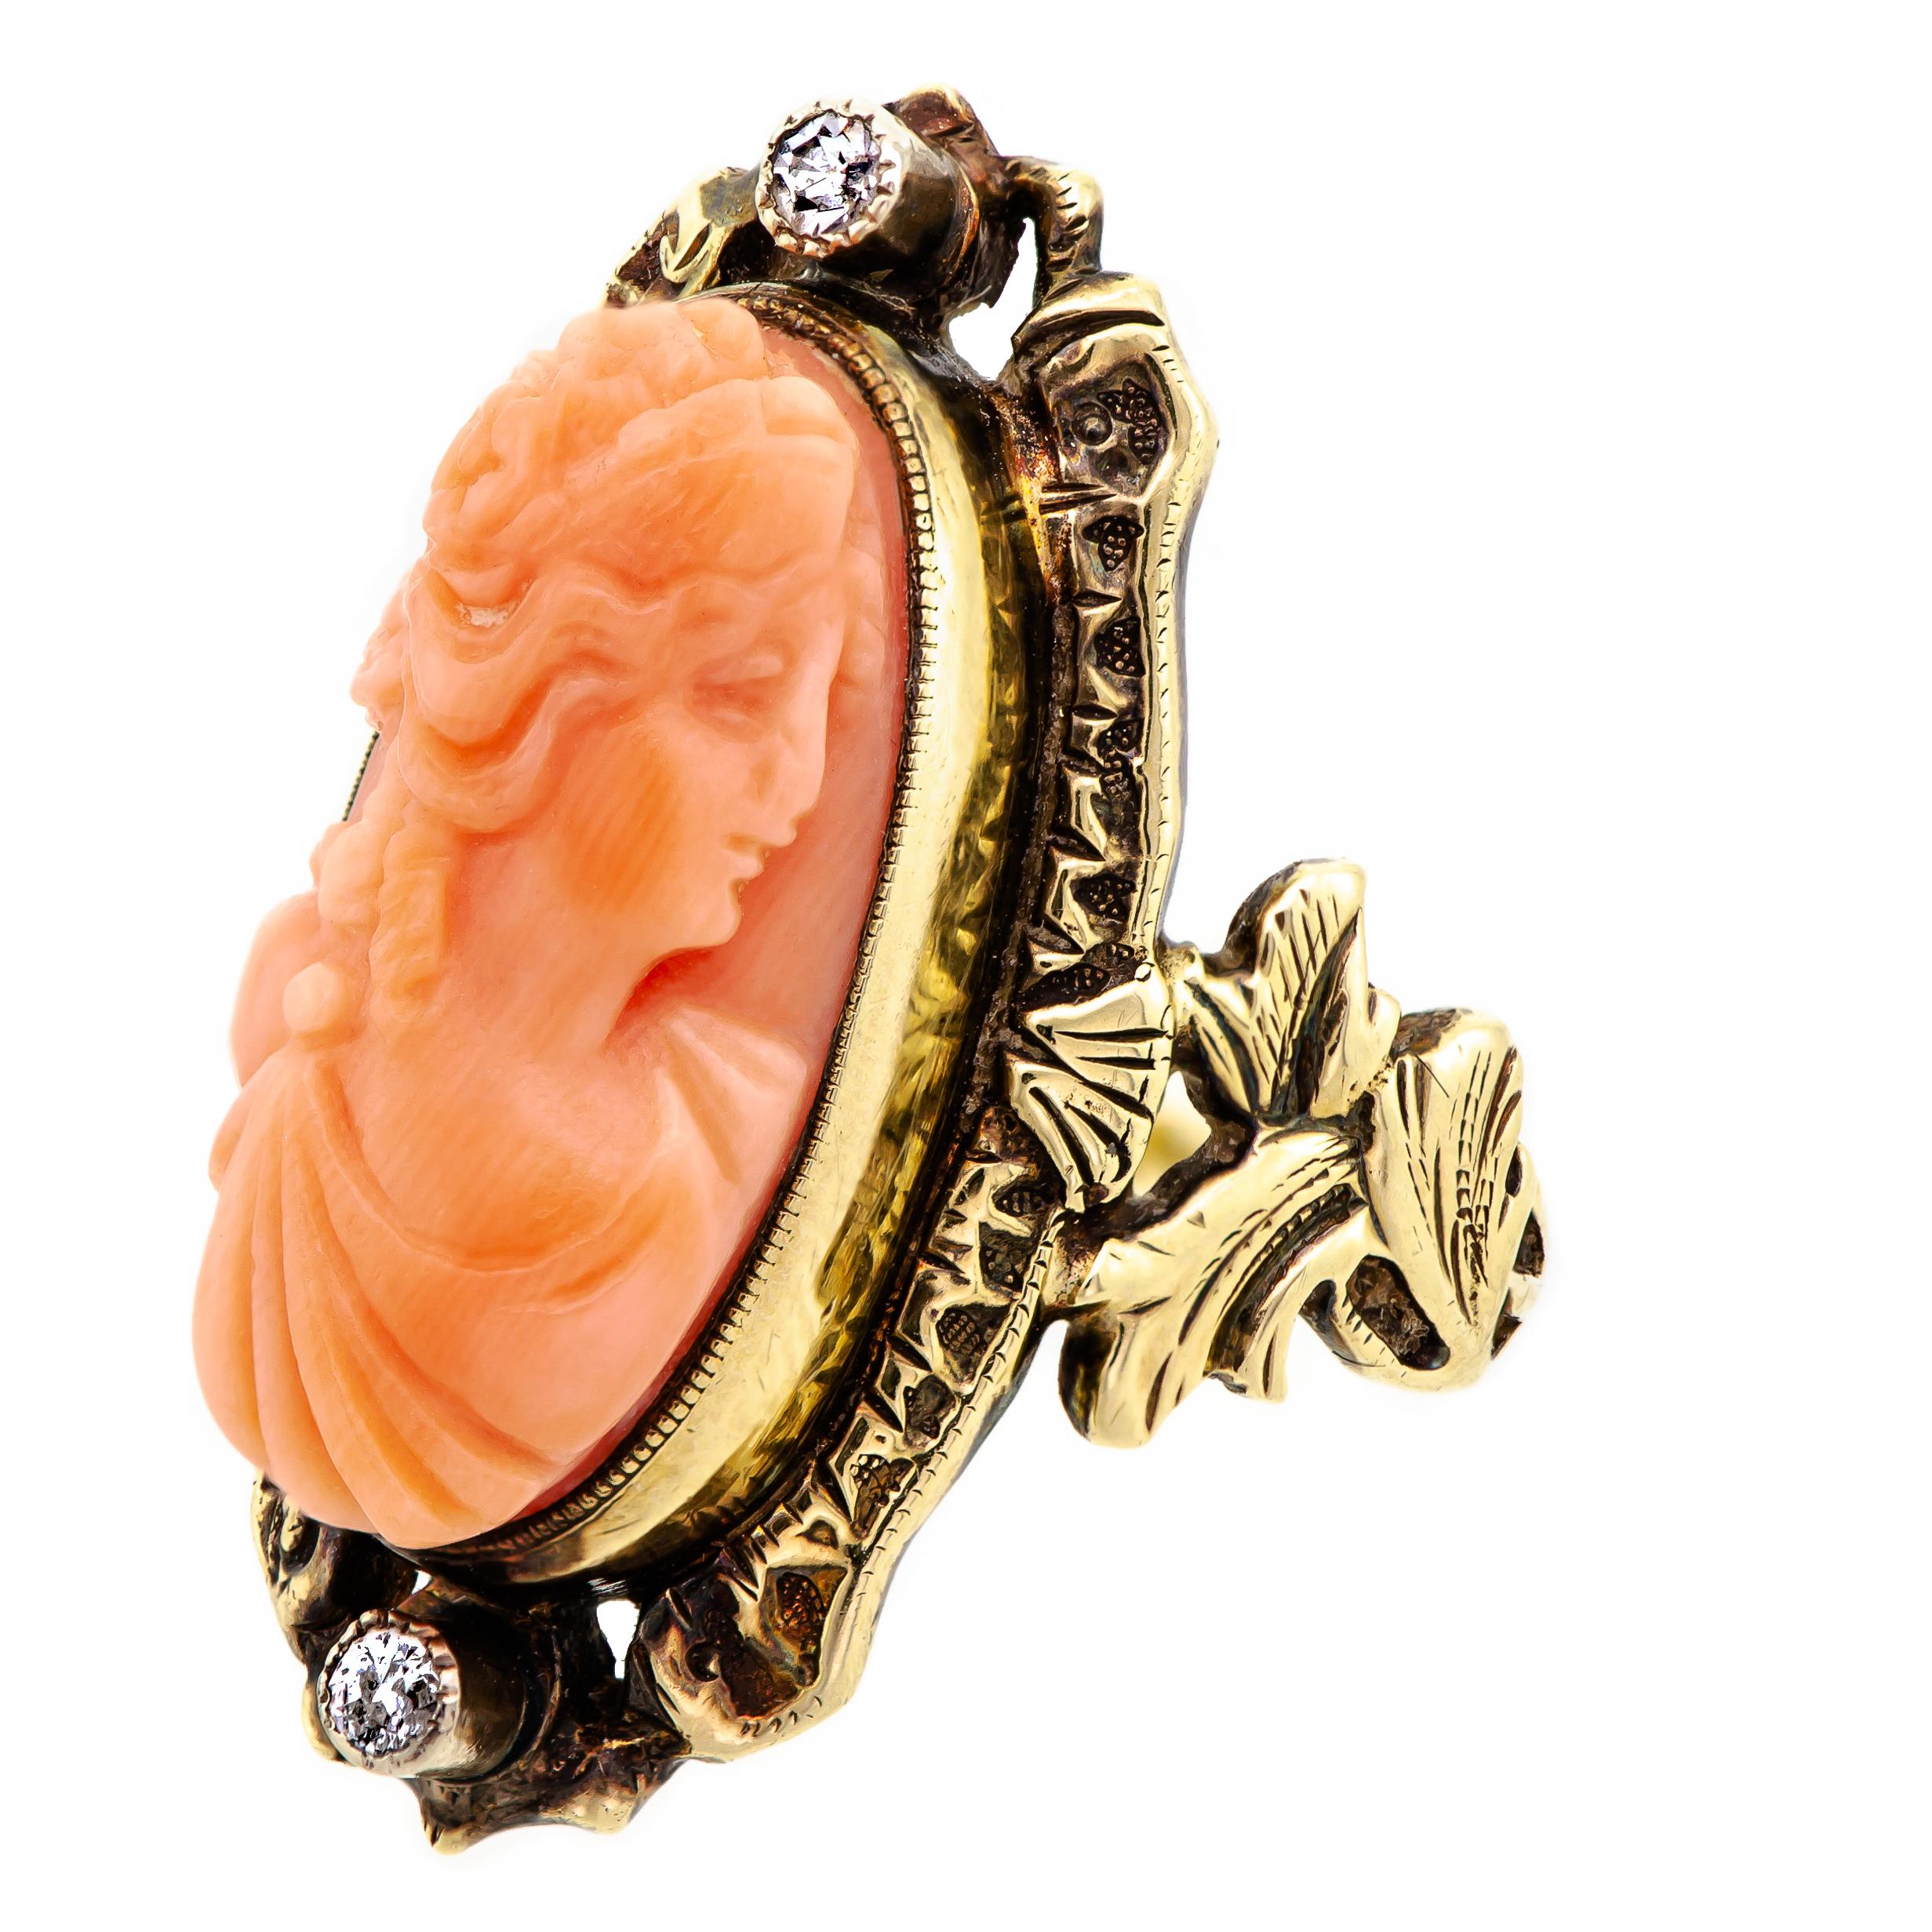 Lovely circa 1895 late Victorian coral cameo and diamond ring centrally bezel set with an oval-shaped light orange coral cameo of a 